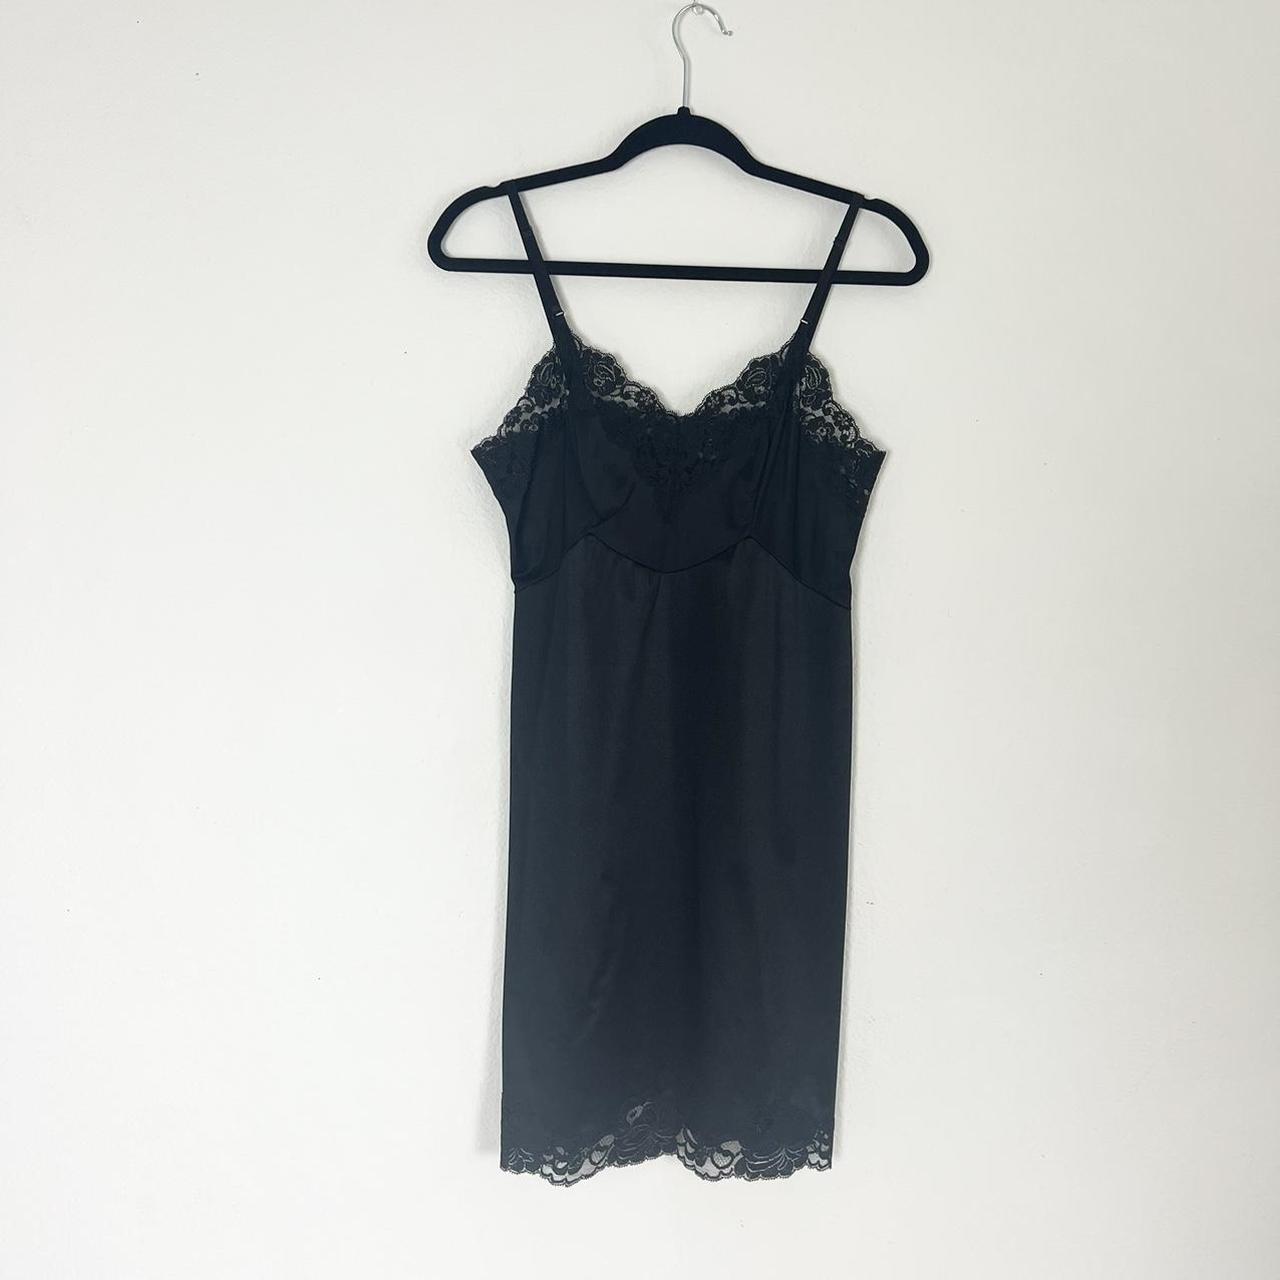 Chemise Negligee Slip Dress Lingerie S Small Black Lace Cut-Out